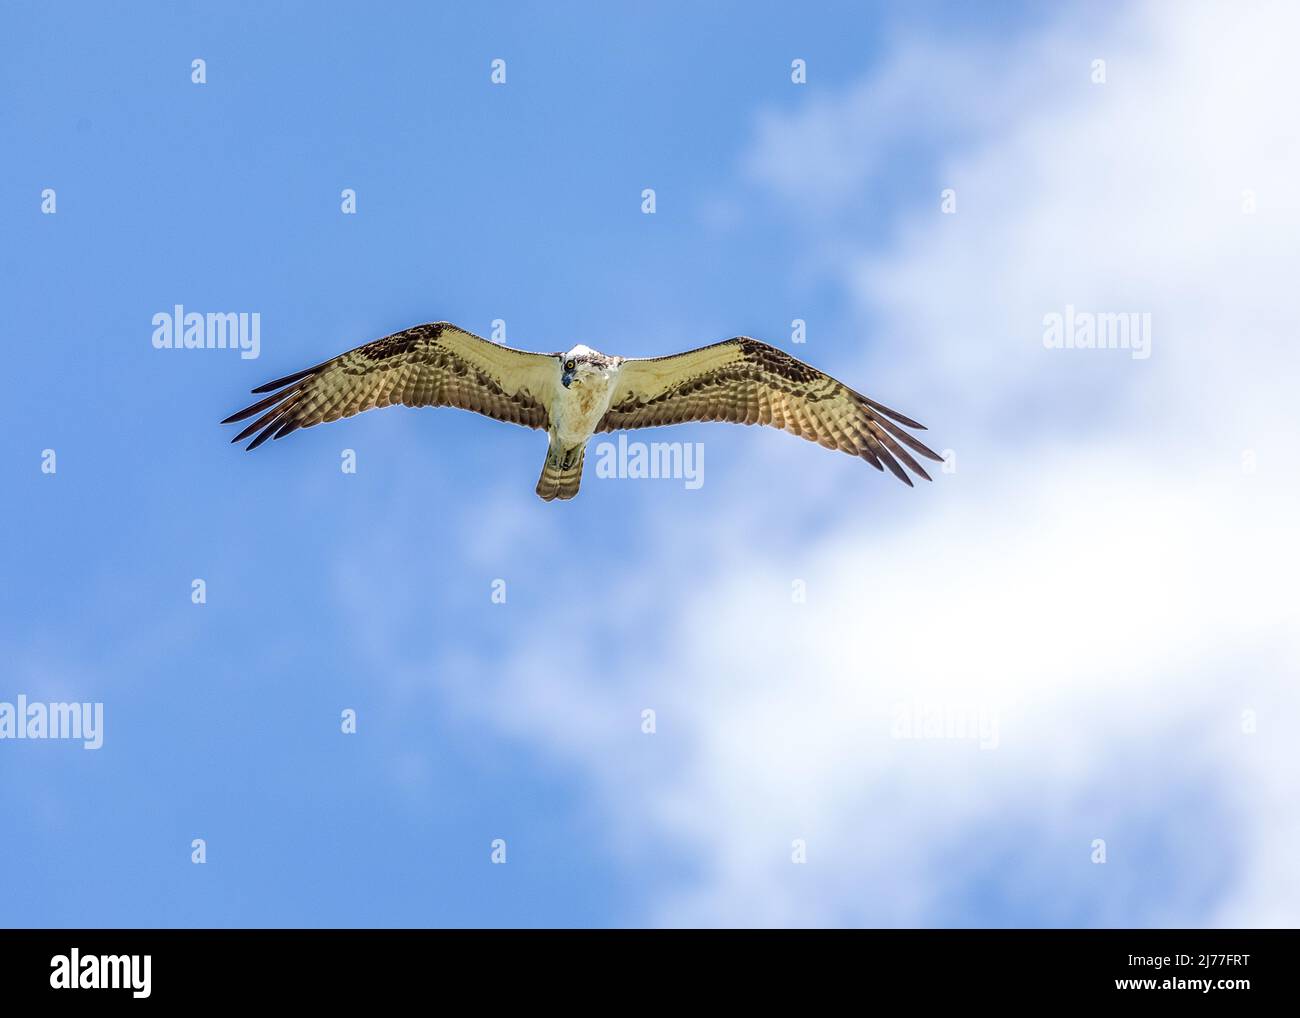 Osprey soaring over the ponds and marsh at Sweetwater wetlands park in Florida Stock Photo